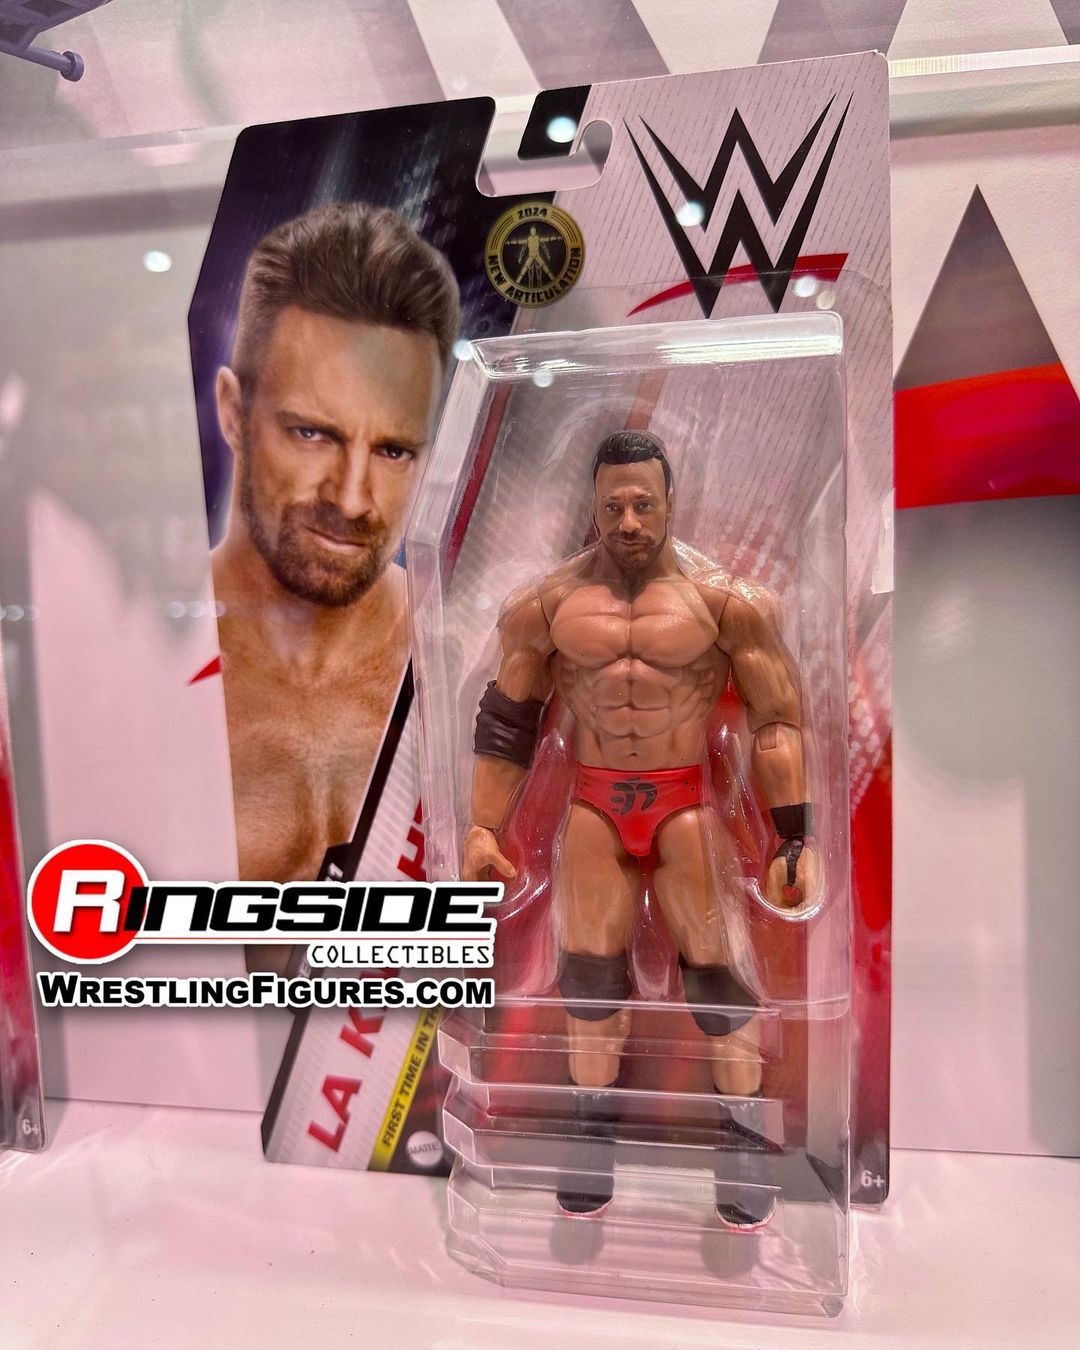 Build Your WWE Action Figure Collection at Wrestling Shop